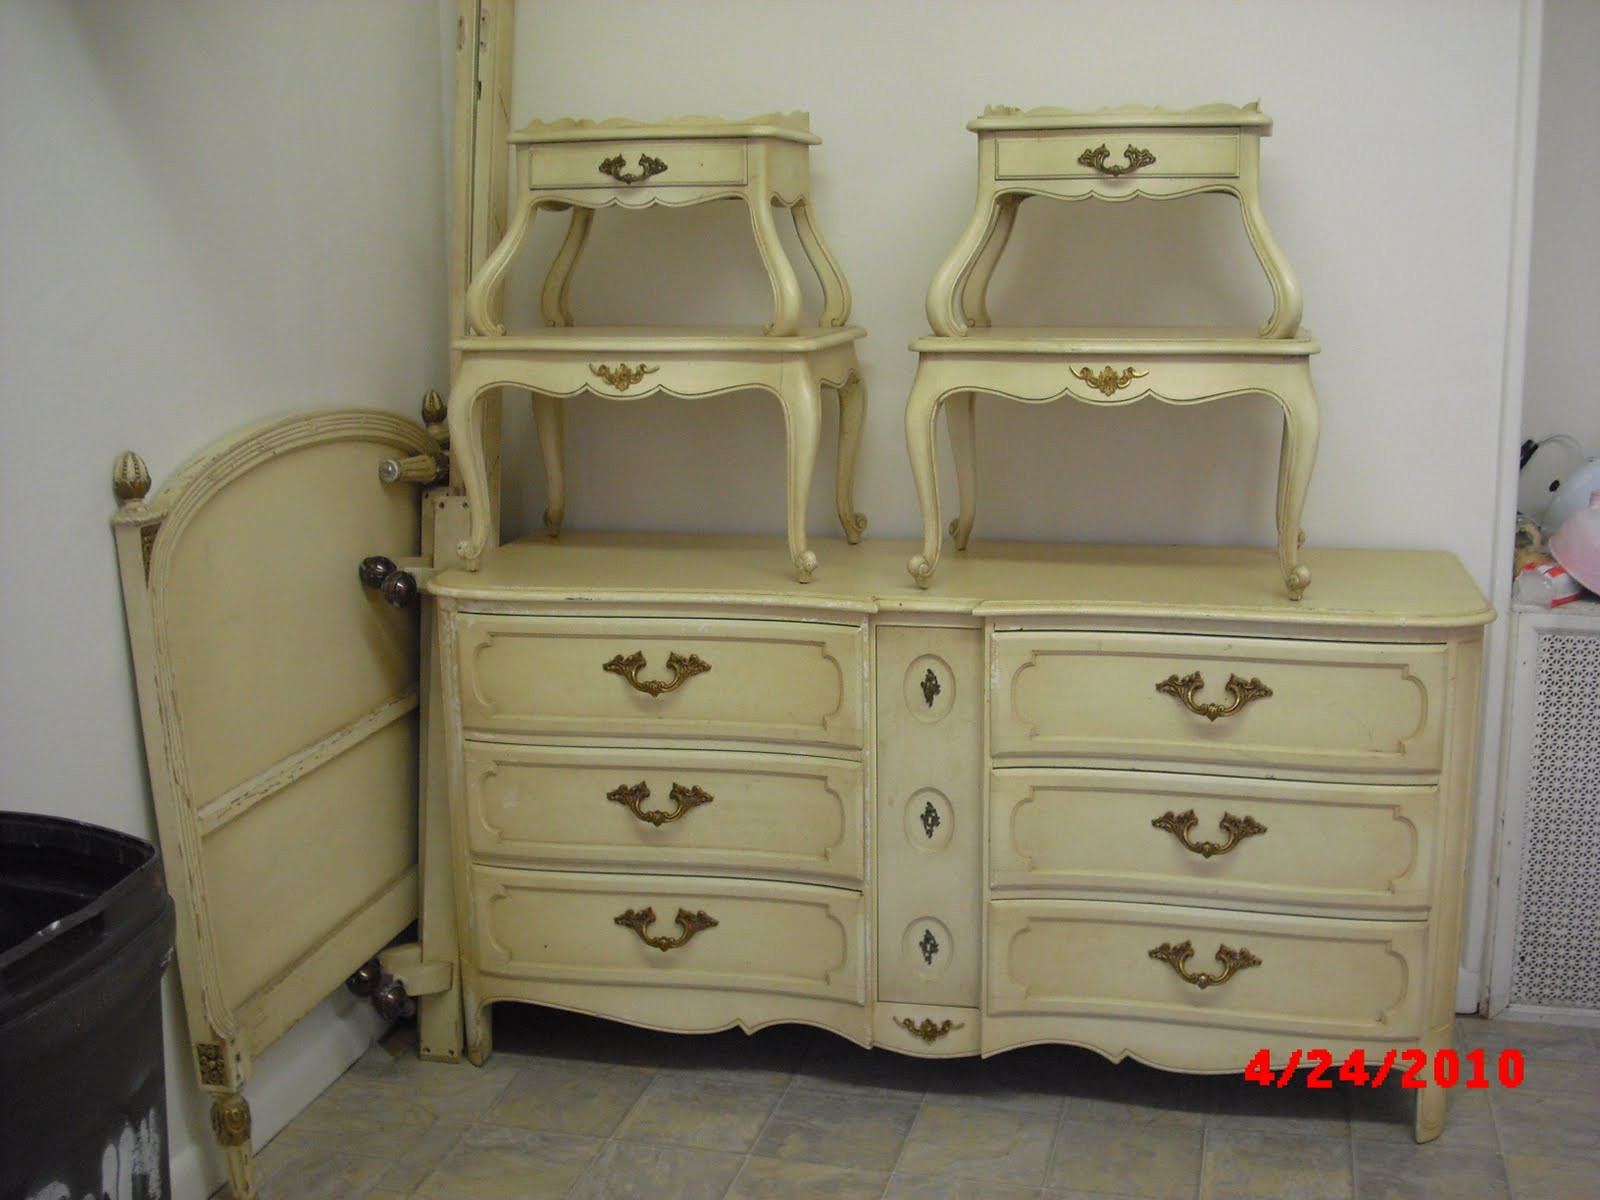 Painted Bedroom Furniture
 Handpainted Furniture Blog Shabby Chic Vintage Painted